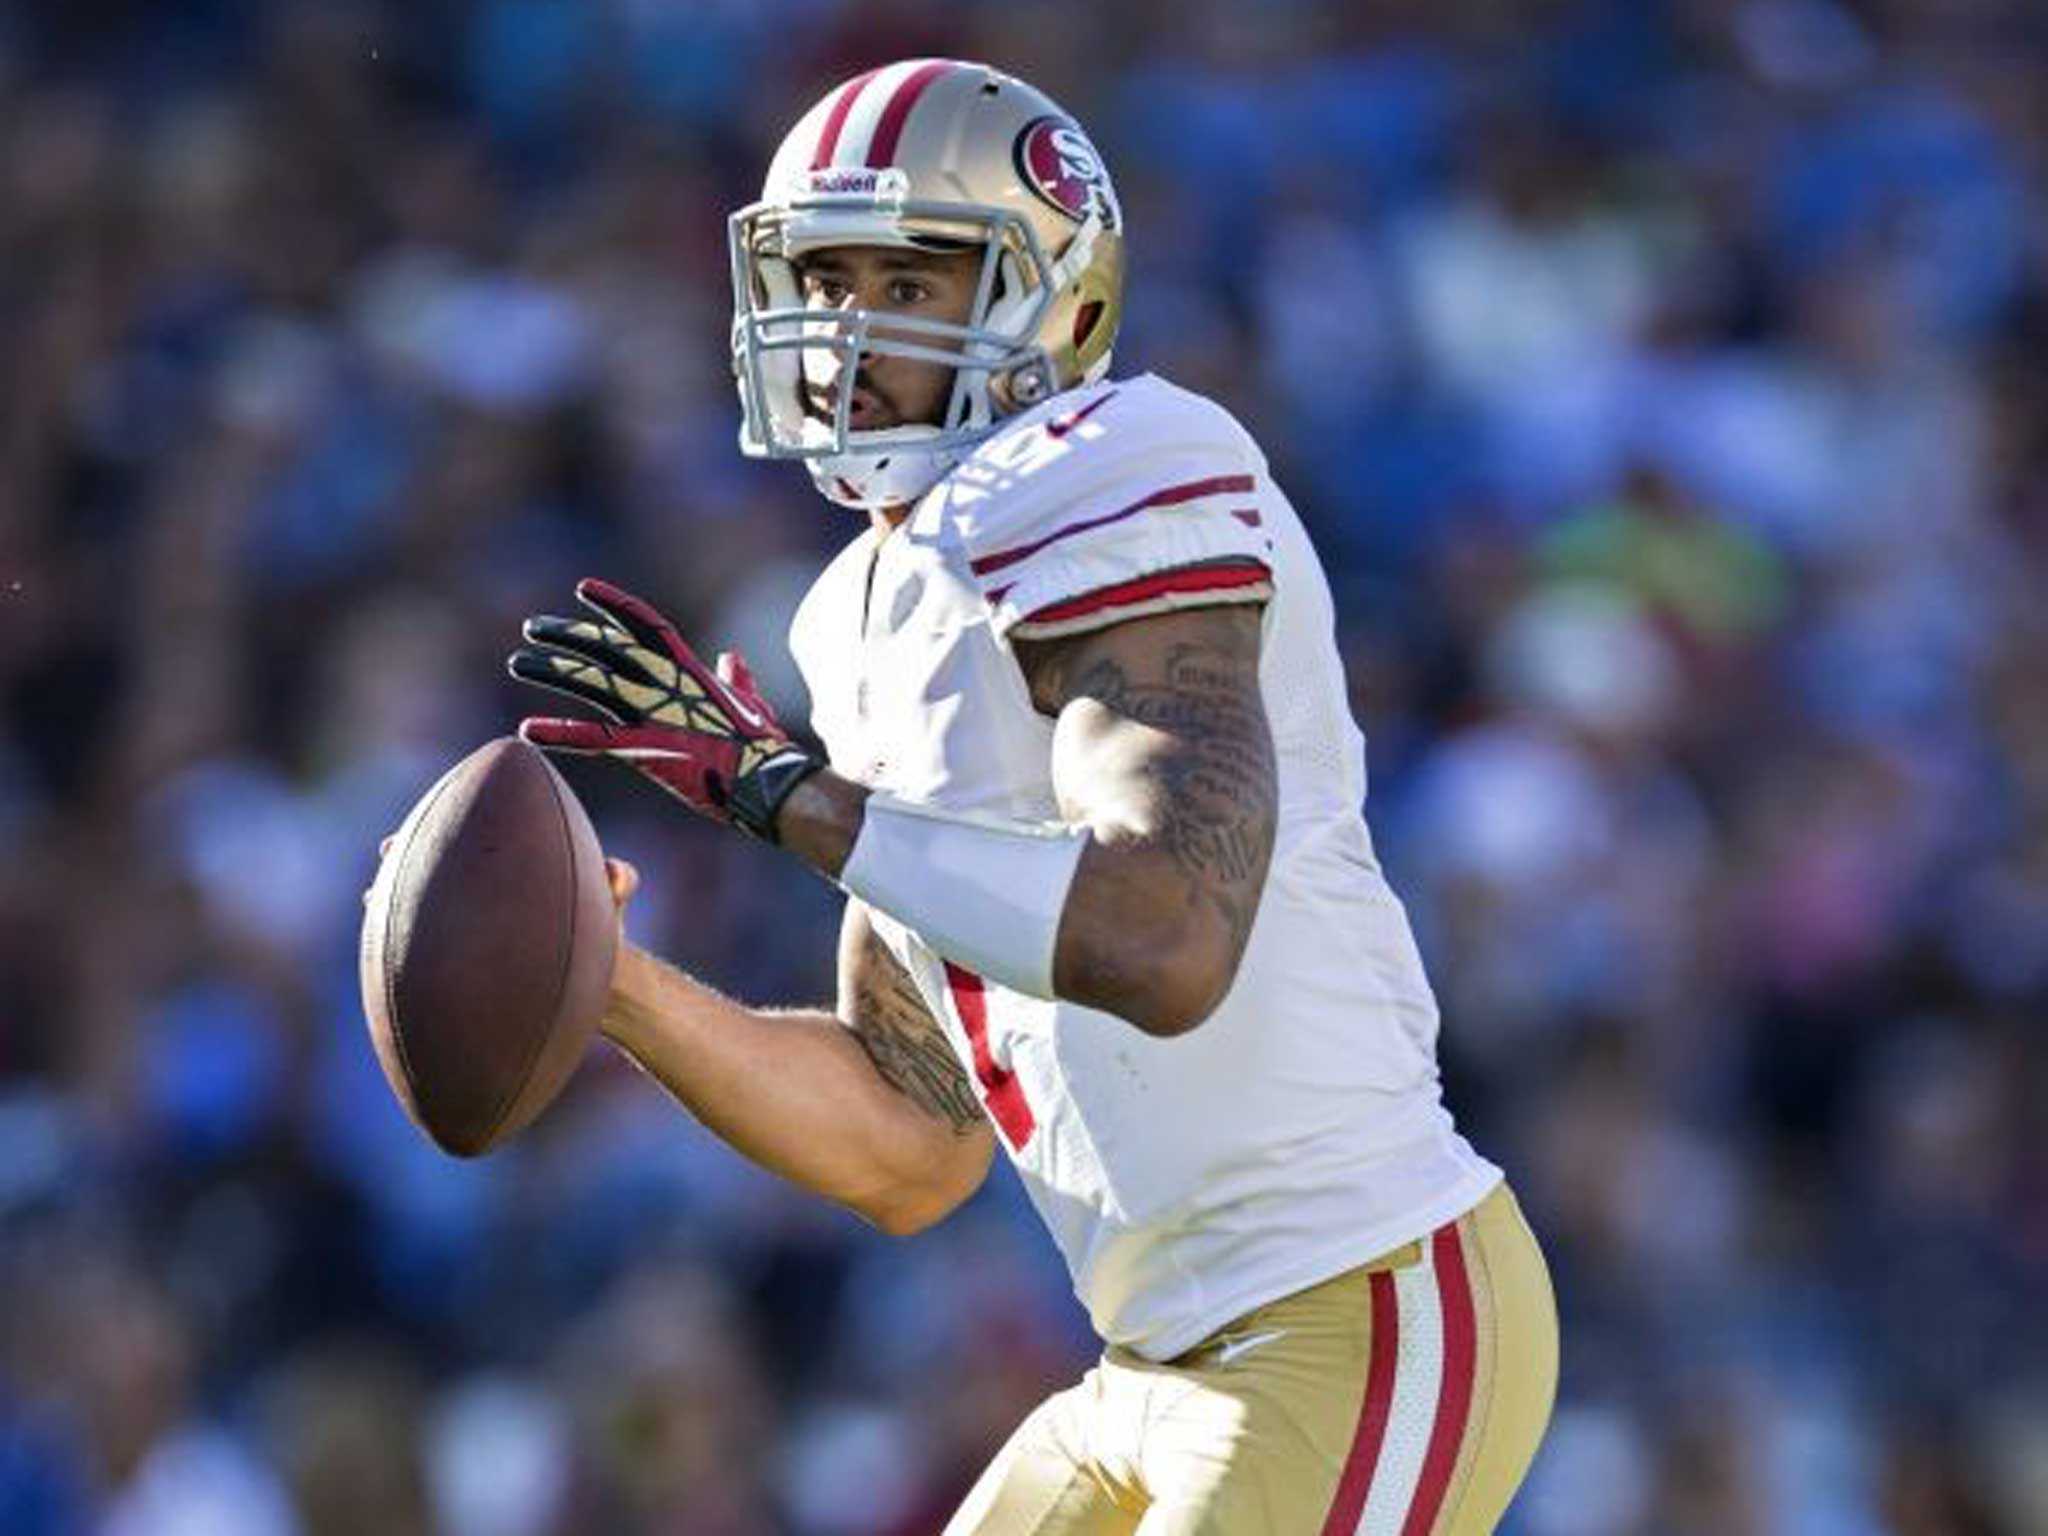 Throw back: Quarterback Colin Kaepernick leads the 49ers offense today